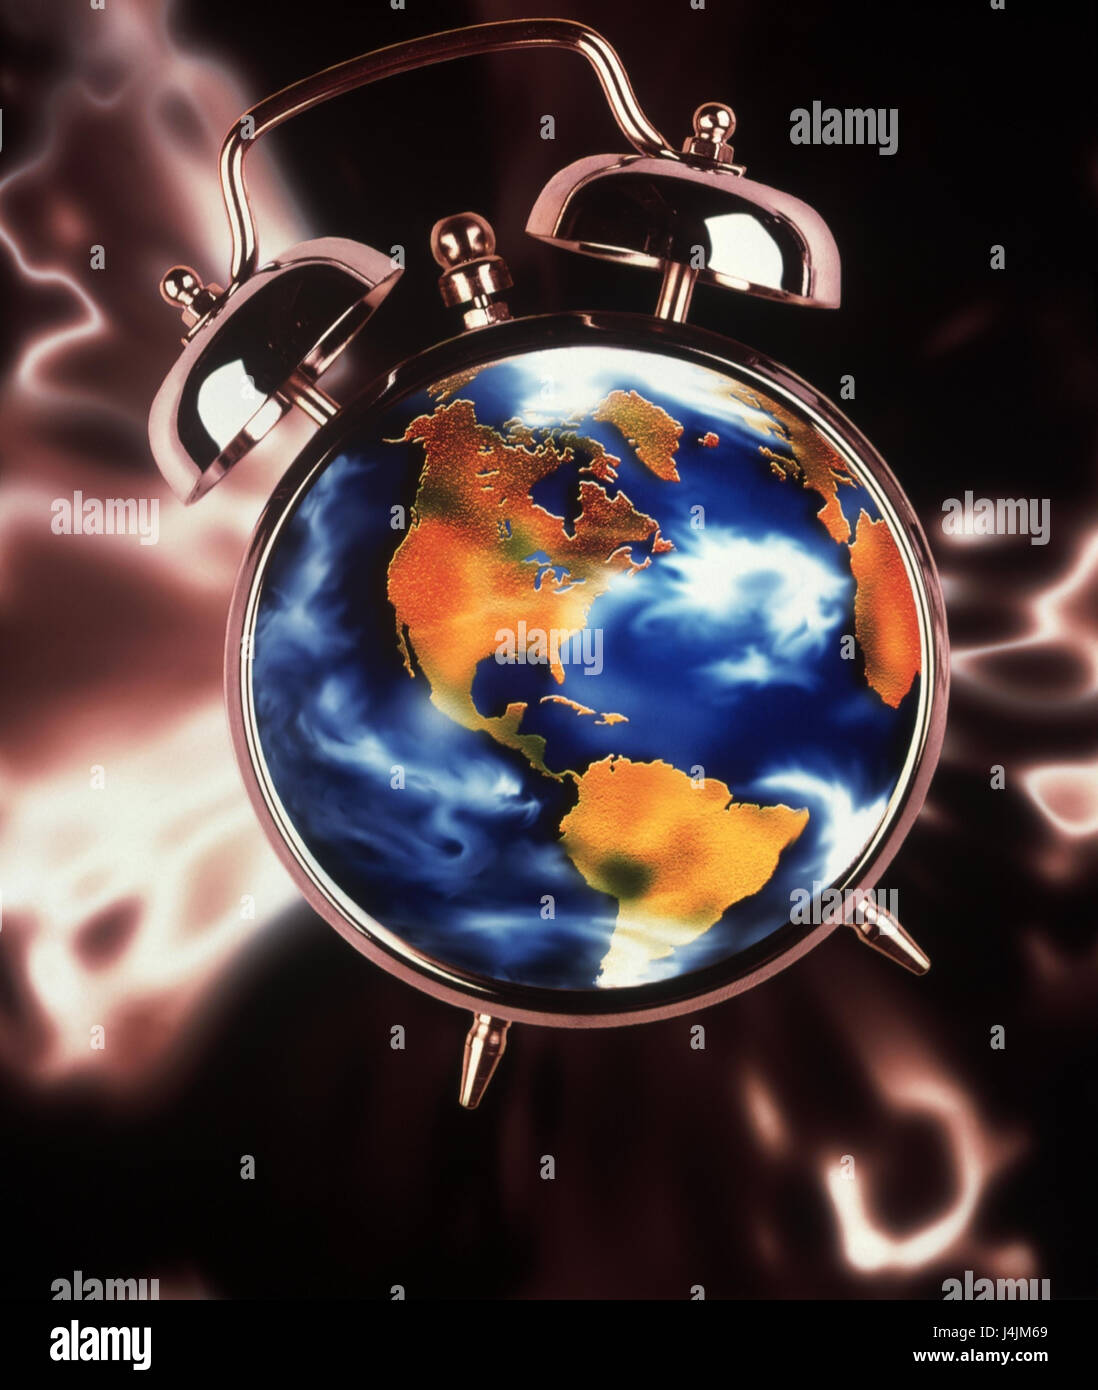 Composing, alarm clock, globe, continents weather, ground, continent, clock, time, transitoriness, future, environment protection, environmental influences, time execution Stock Photo